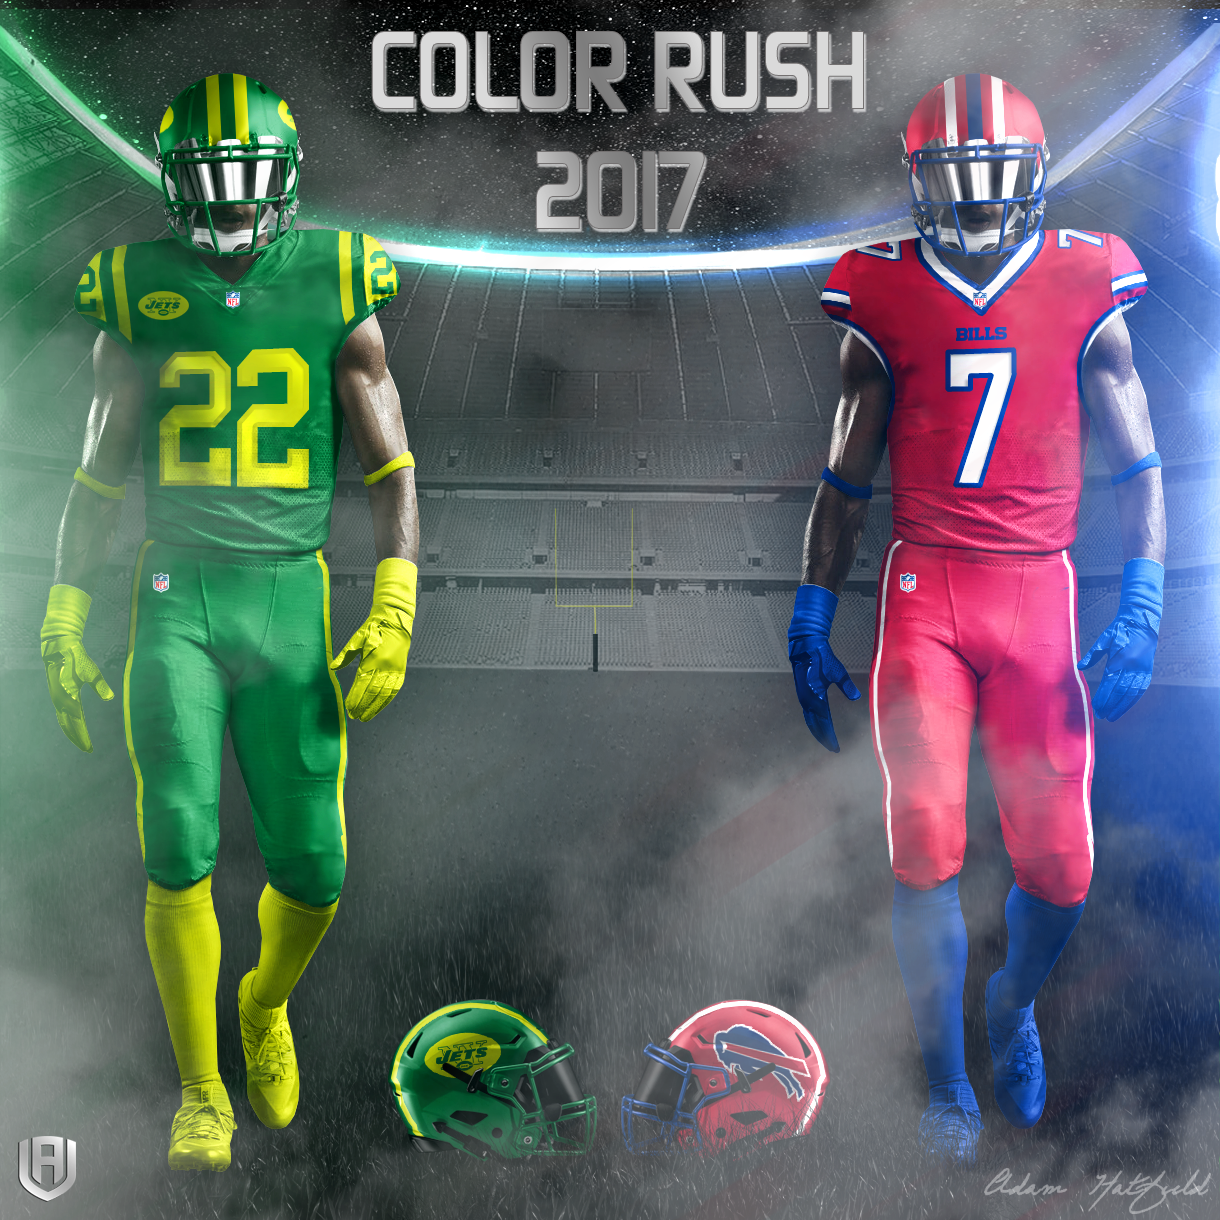 Design Adam S Take On Nfl Color Rush 2017 Touchdown Europe Coloring Wallpapers Download Free Images Wallpaper [coloring365.blogspot.com]